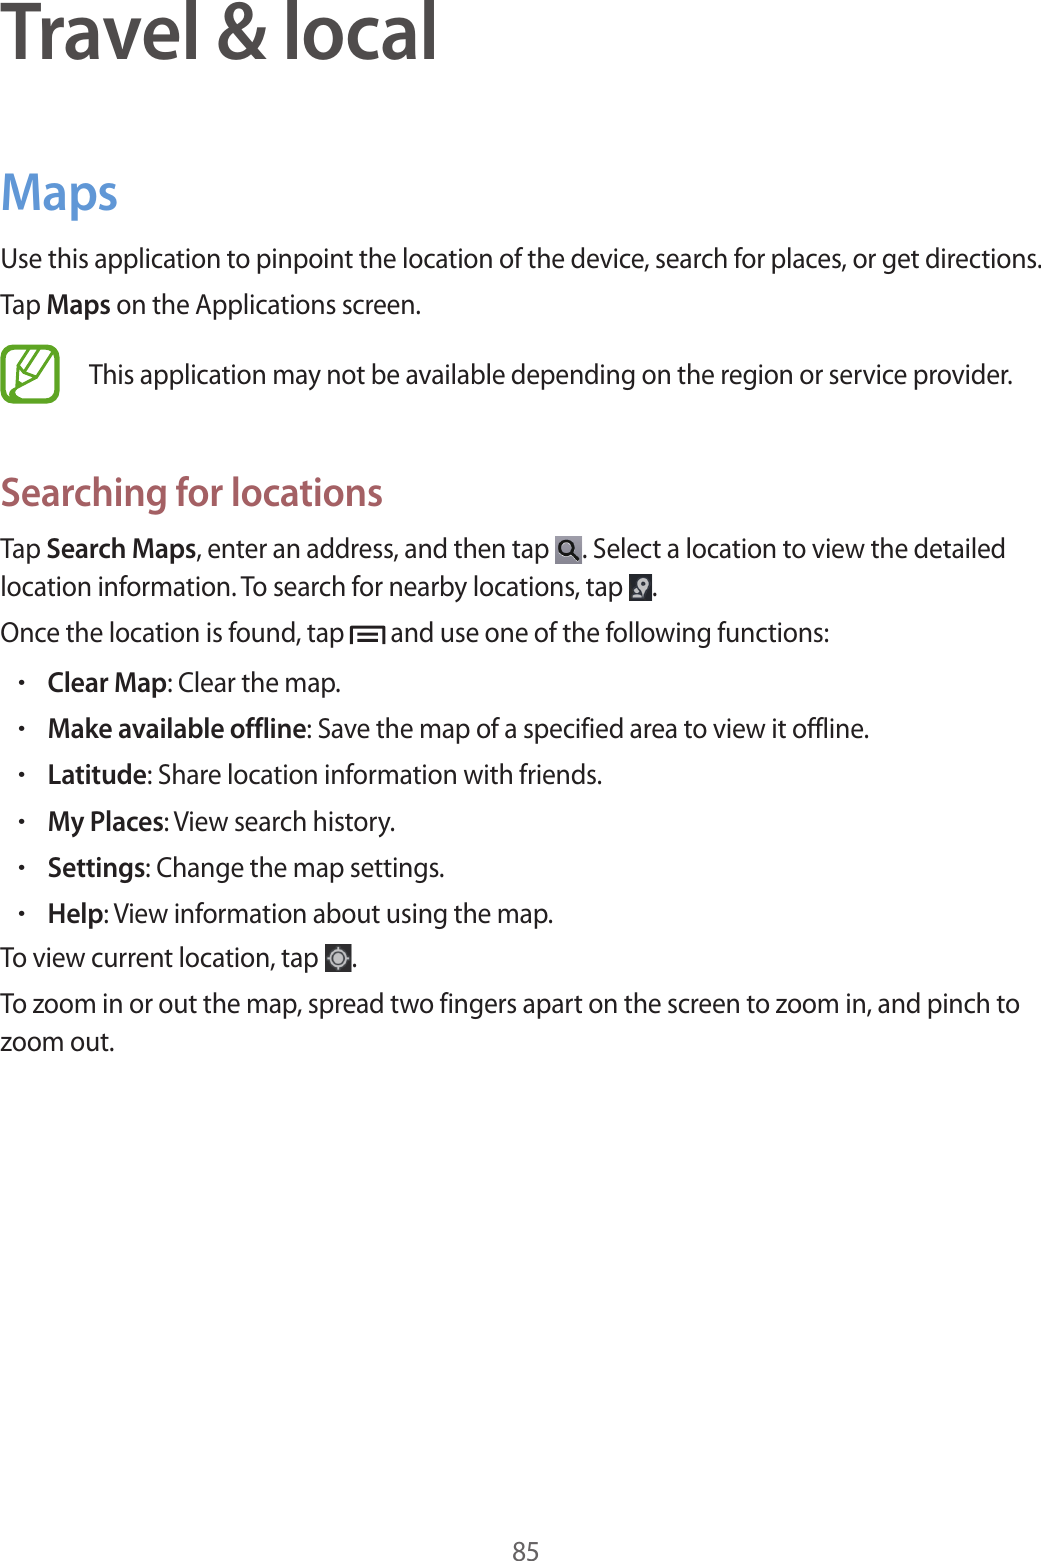 85Travel &amp; localMapsUse this application to pinpoint the location of the device, search for places, or get directions.Tap Maps on the Applications screen.This application may not be available depending on the region or service provider.Searching for locationsTap Search Maps, enter an address, and then tap  . Select a location to view the detailed location information. To search for nearby locations, tap  .Once the location is found, tap   and use one of the following functions:• Clear Map: Clear the map.• Make available offline: Save the map of a specified area to view it offline.• Latitude: Share location information with friends.• My Places: View search history.• Settings: Change the map settings.• Help: View information about using the map.To view current location, tap  .To zoom in or out the map, spread two fingers apart on the screen to zoom in, and pinch to zoom out.